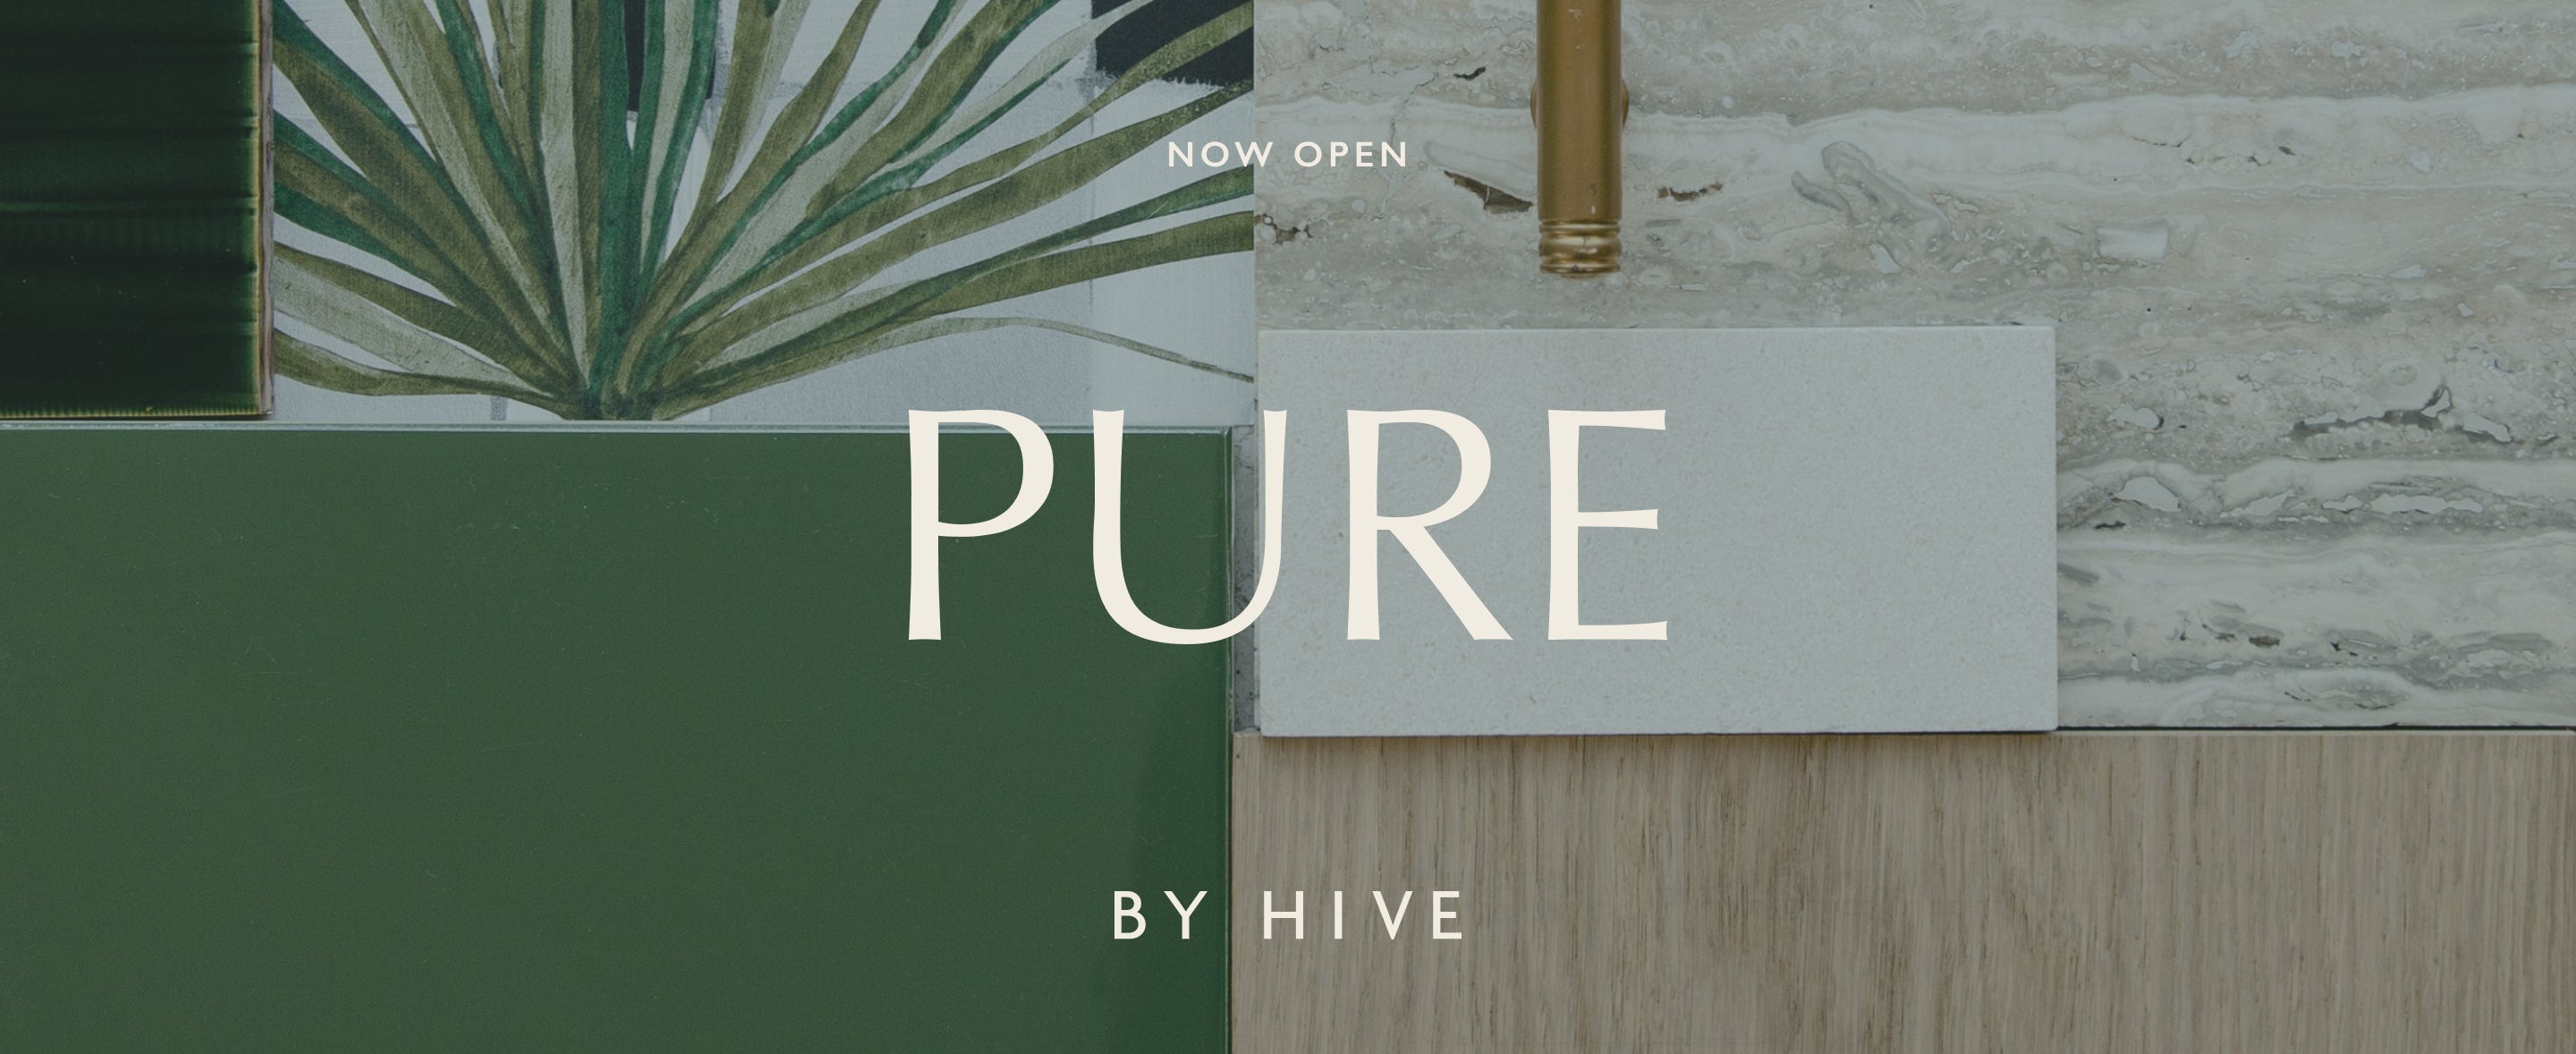 A desktop orientated image of Pure by Hive design scheme utilizing natural, tropical hues with a palm leave wallpaper, rich green tile and modern brass hardware.